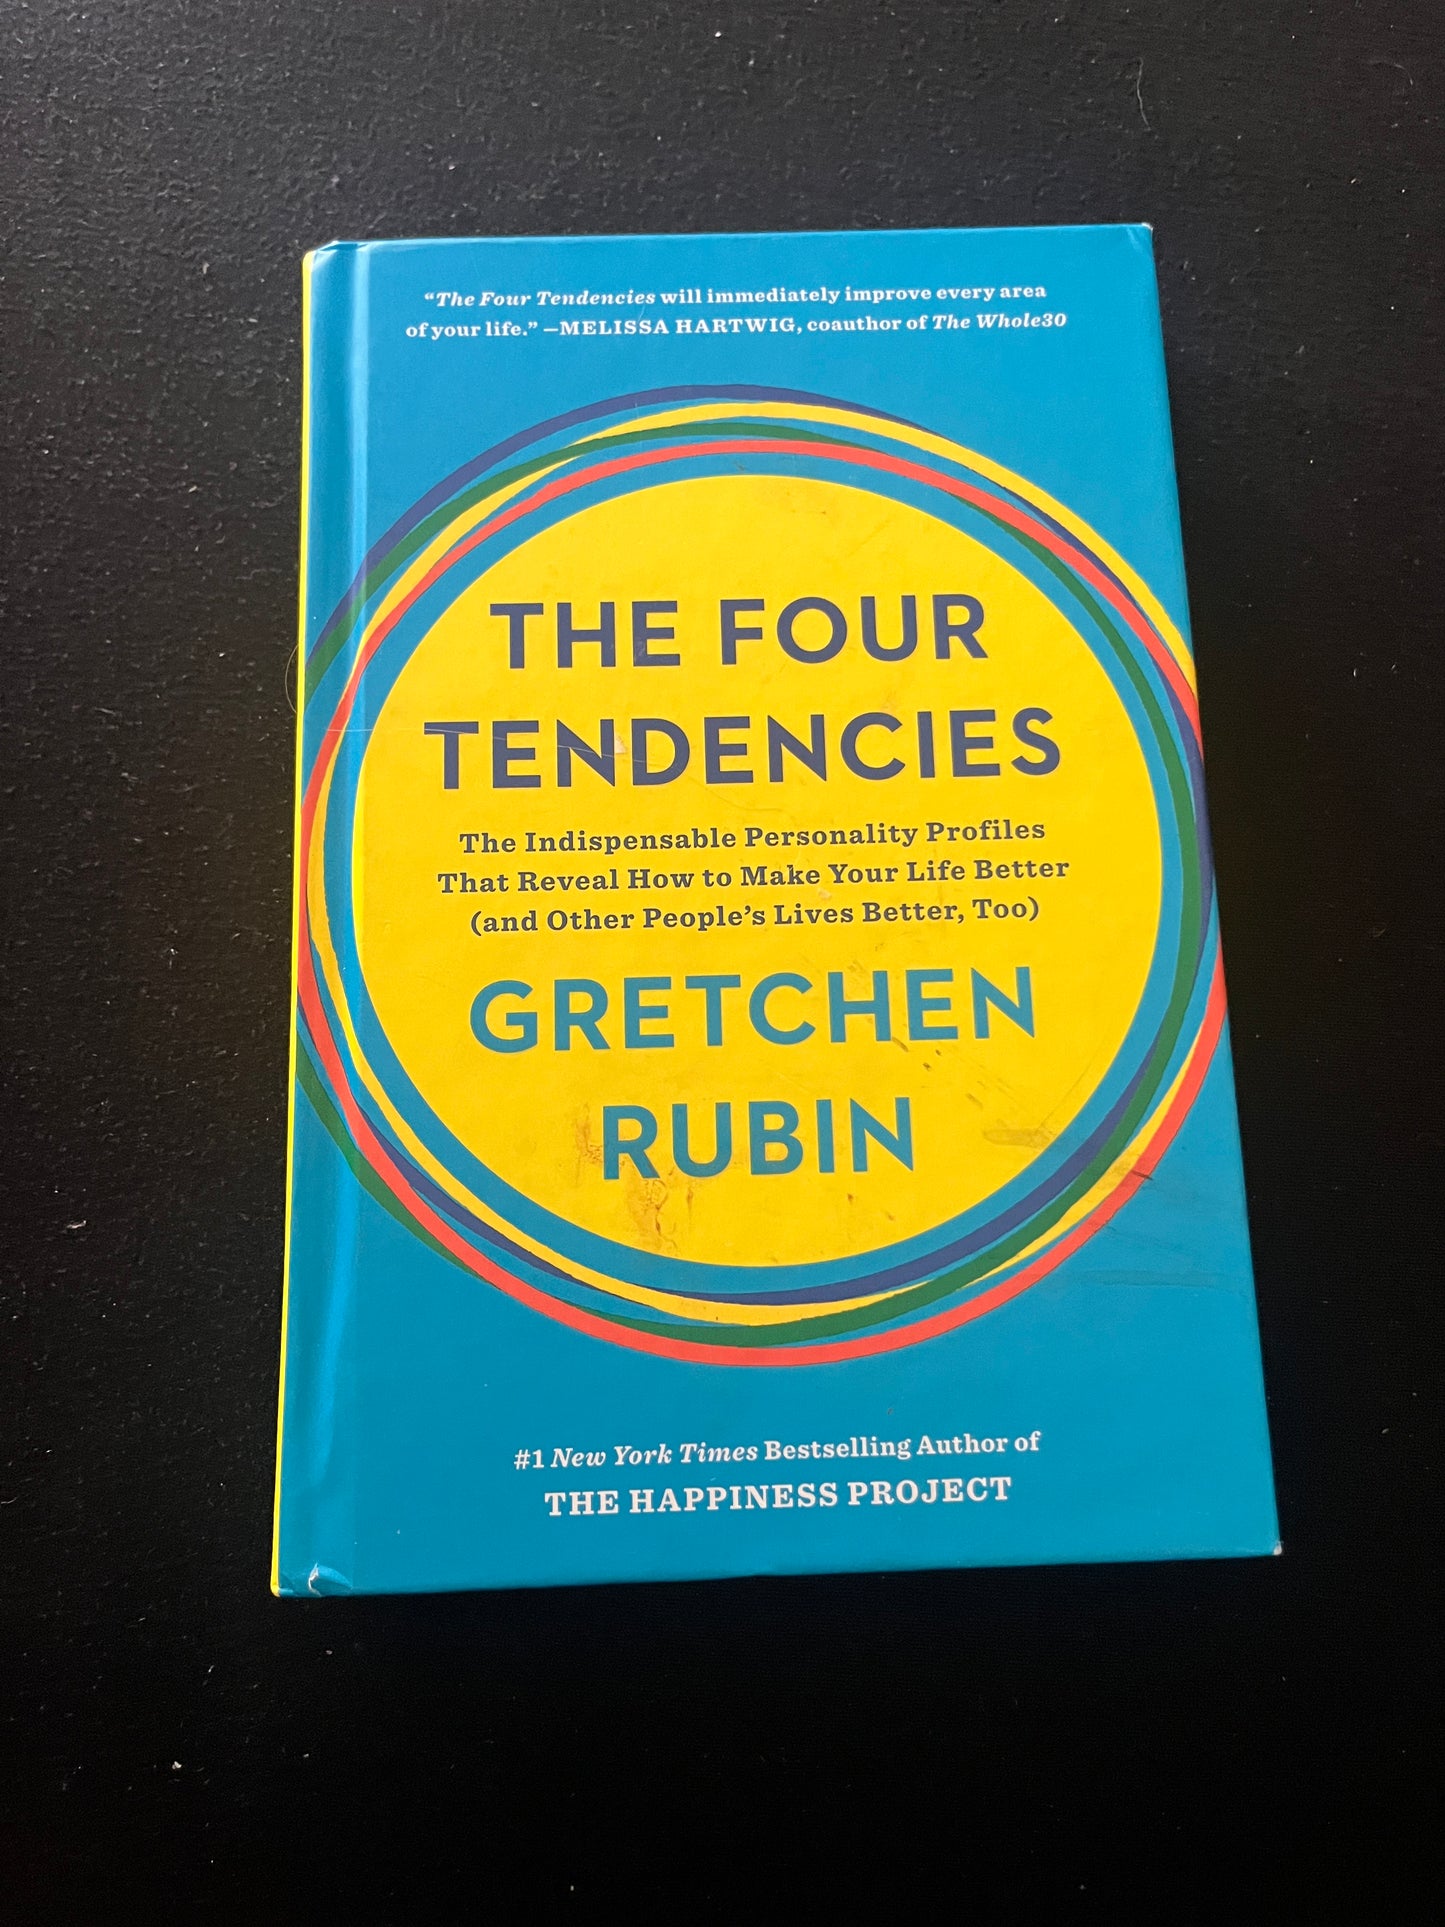 THE FOUR TENDENCIES: The Indispensable Personality Profiles That Reveal How to Make Your Life Better by Gretchen Rubin